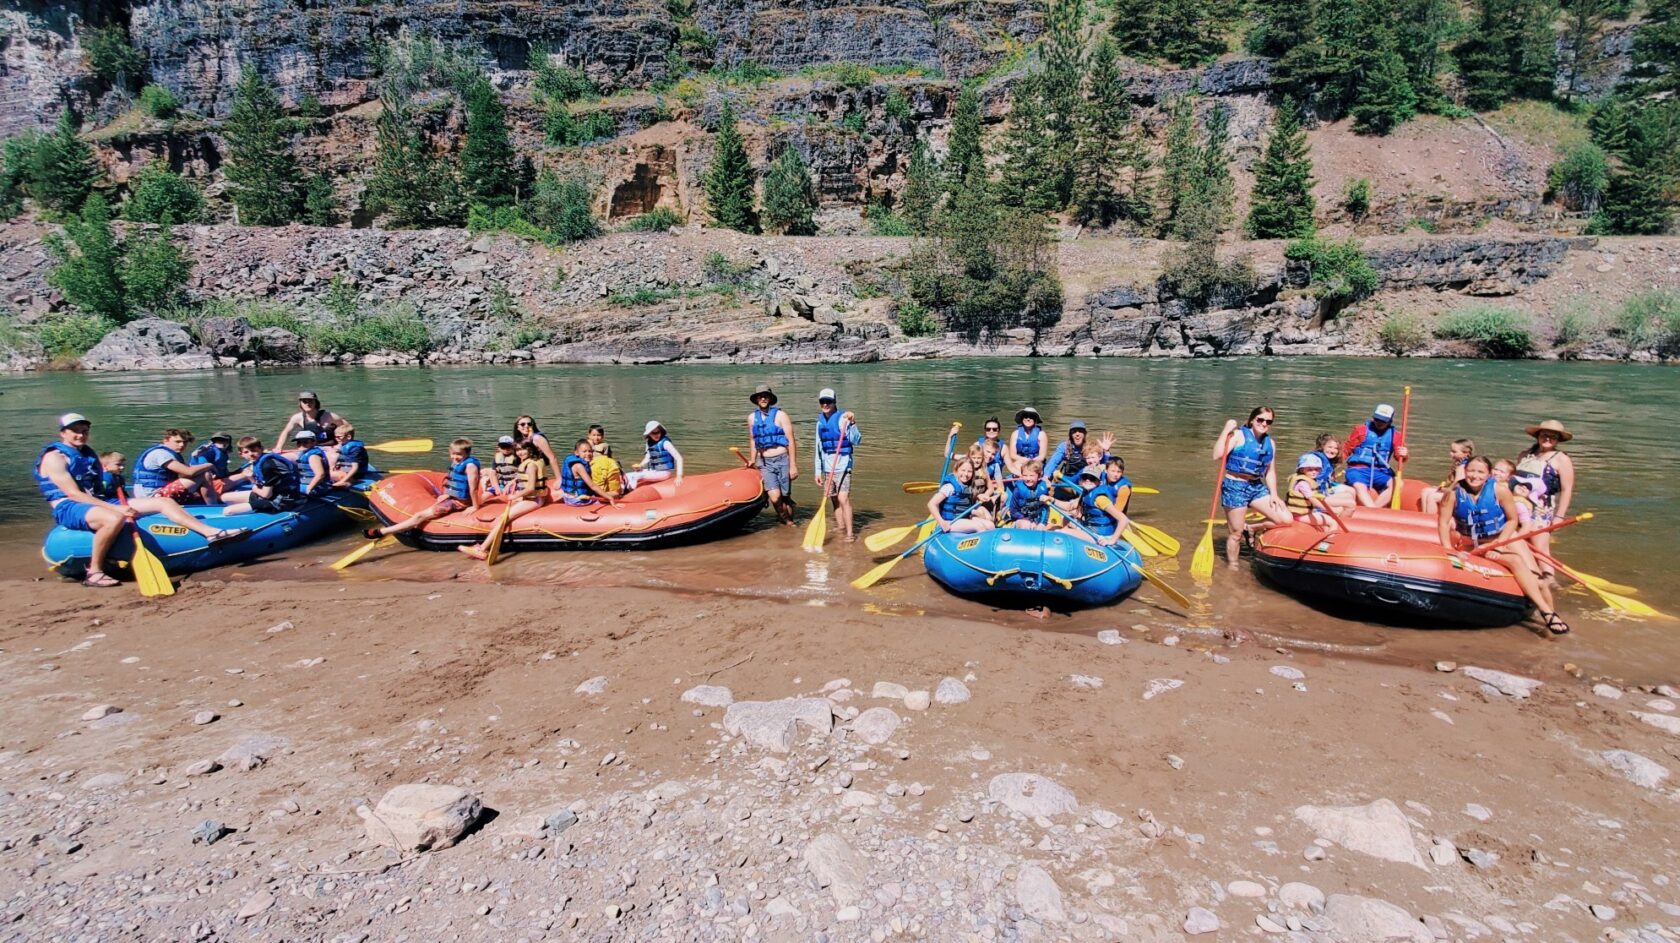 four rafts full of campers on the shore of the river looking excited.